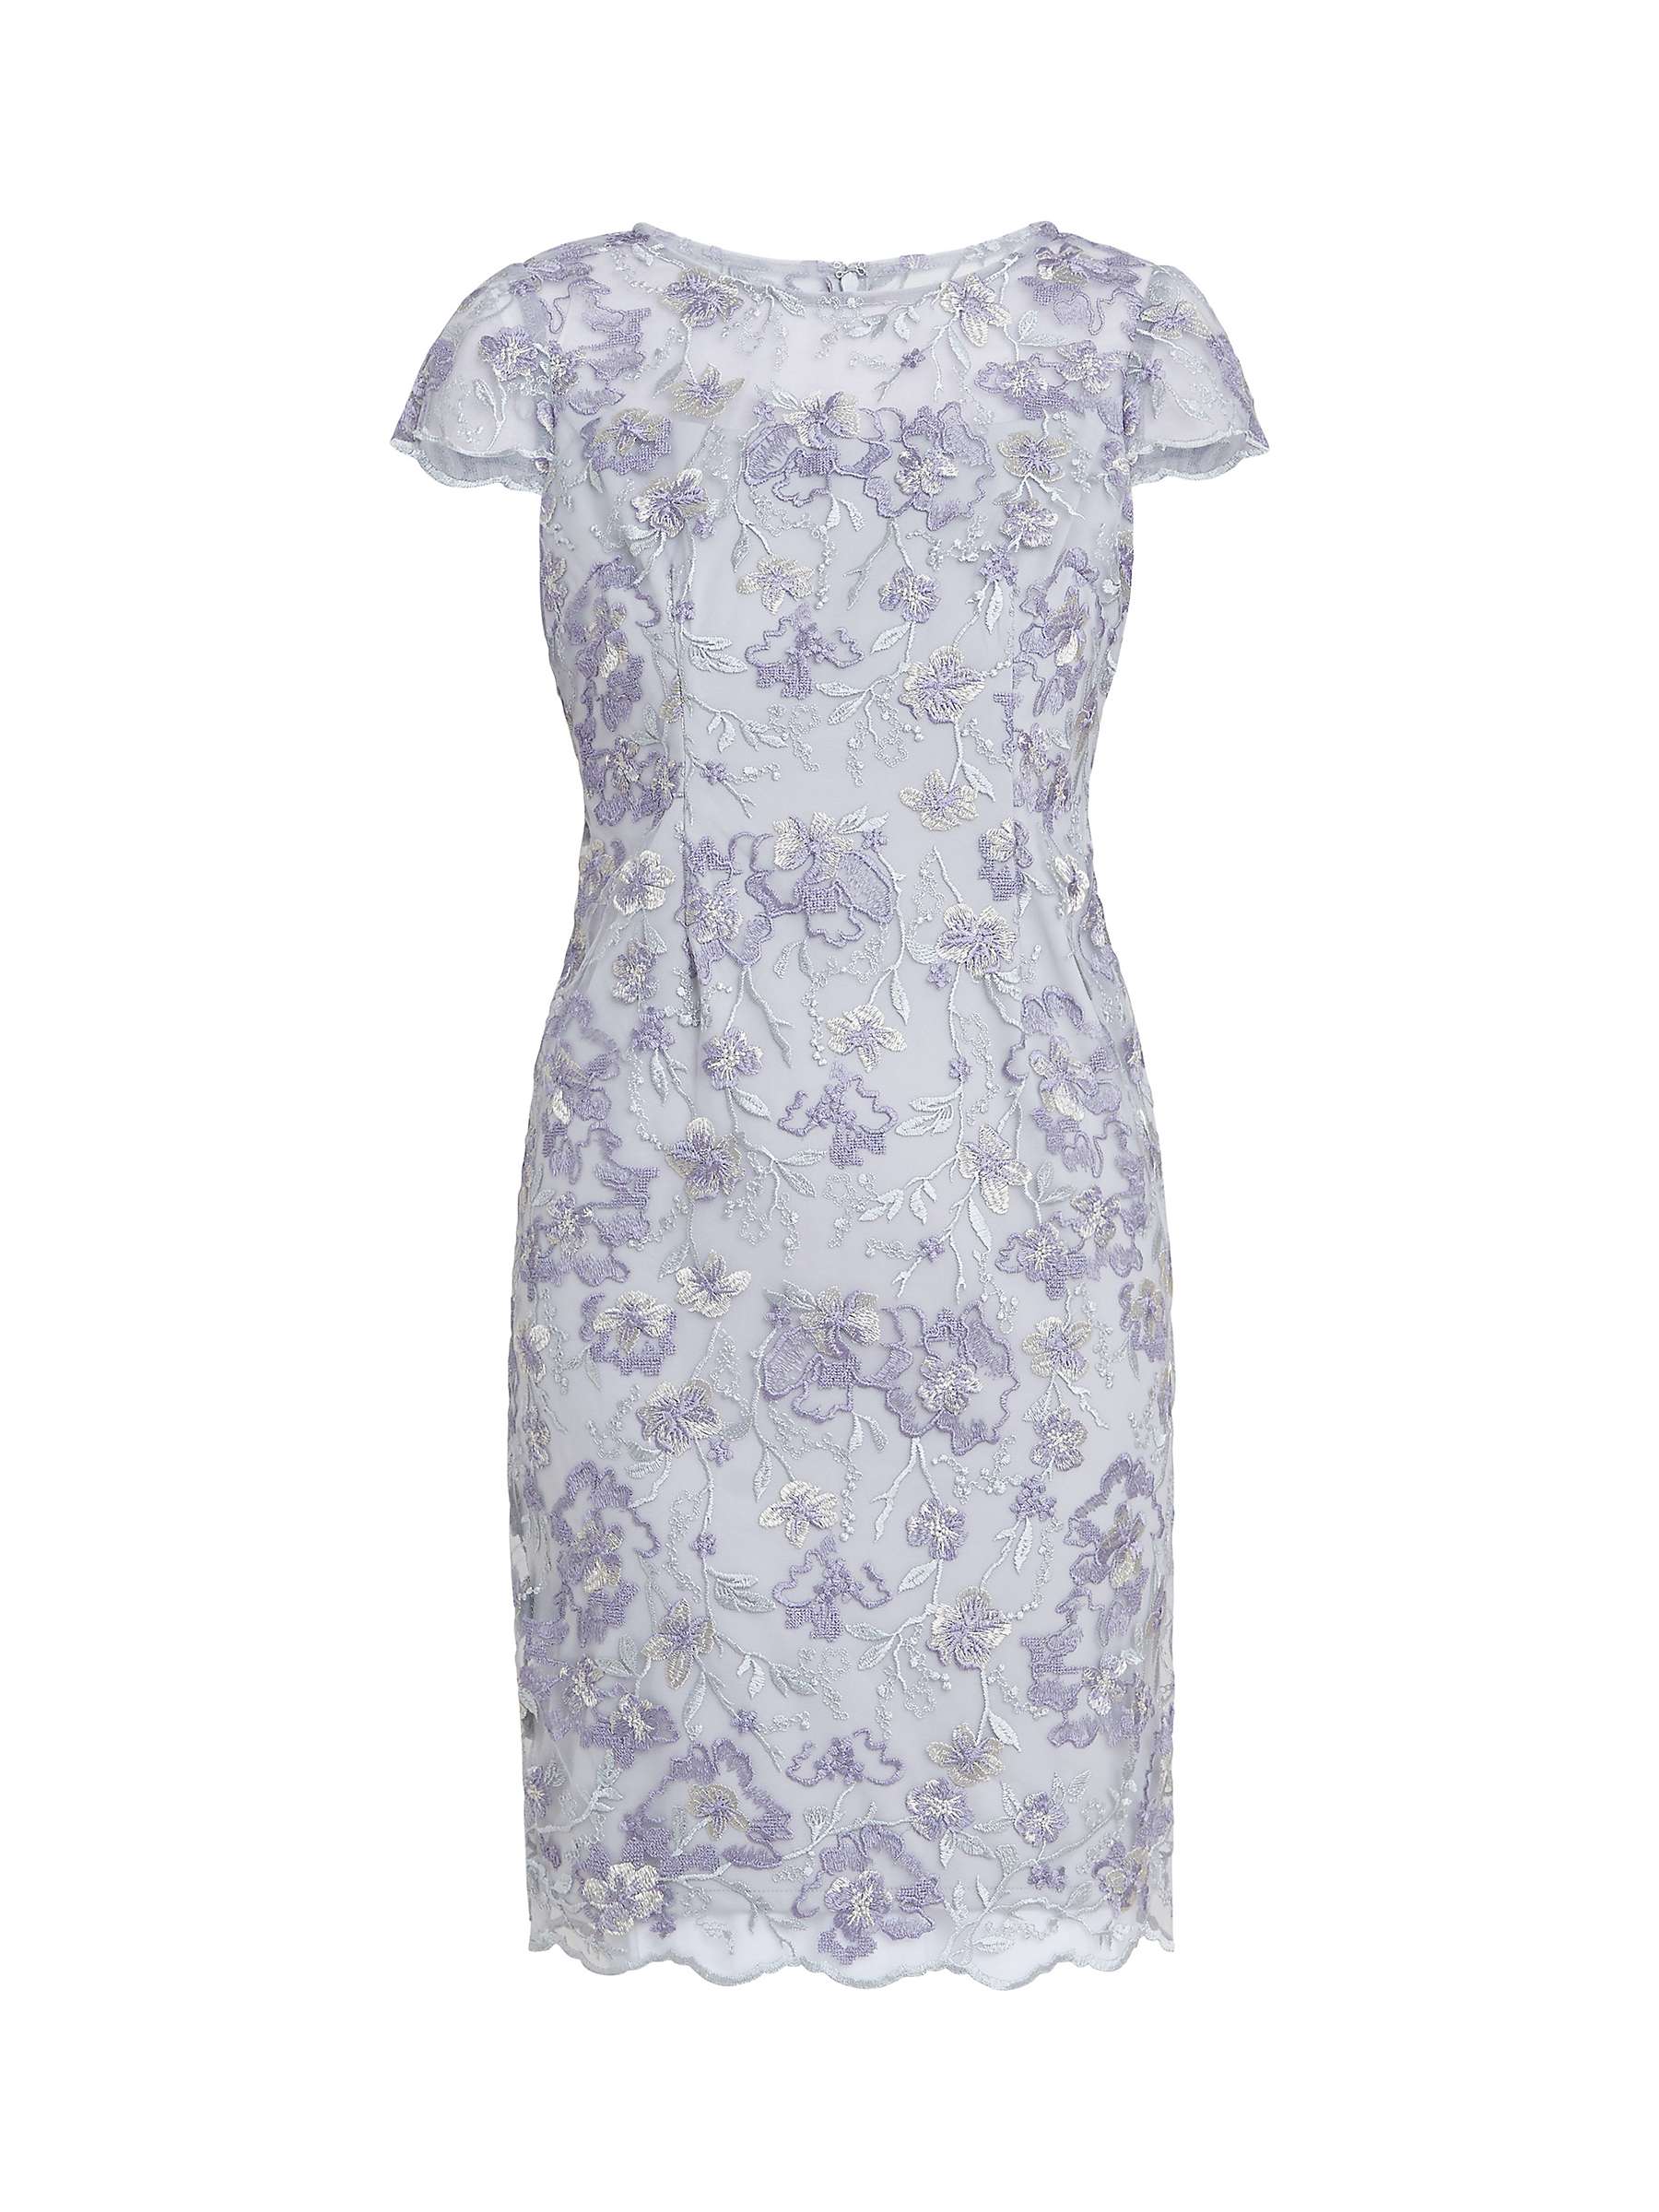 Buy Gina Bacconi Petite Raquelle Embroidered Cap Sleeve Dress, Dove Online at johnlewis.com